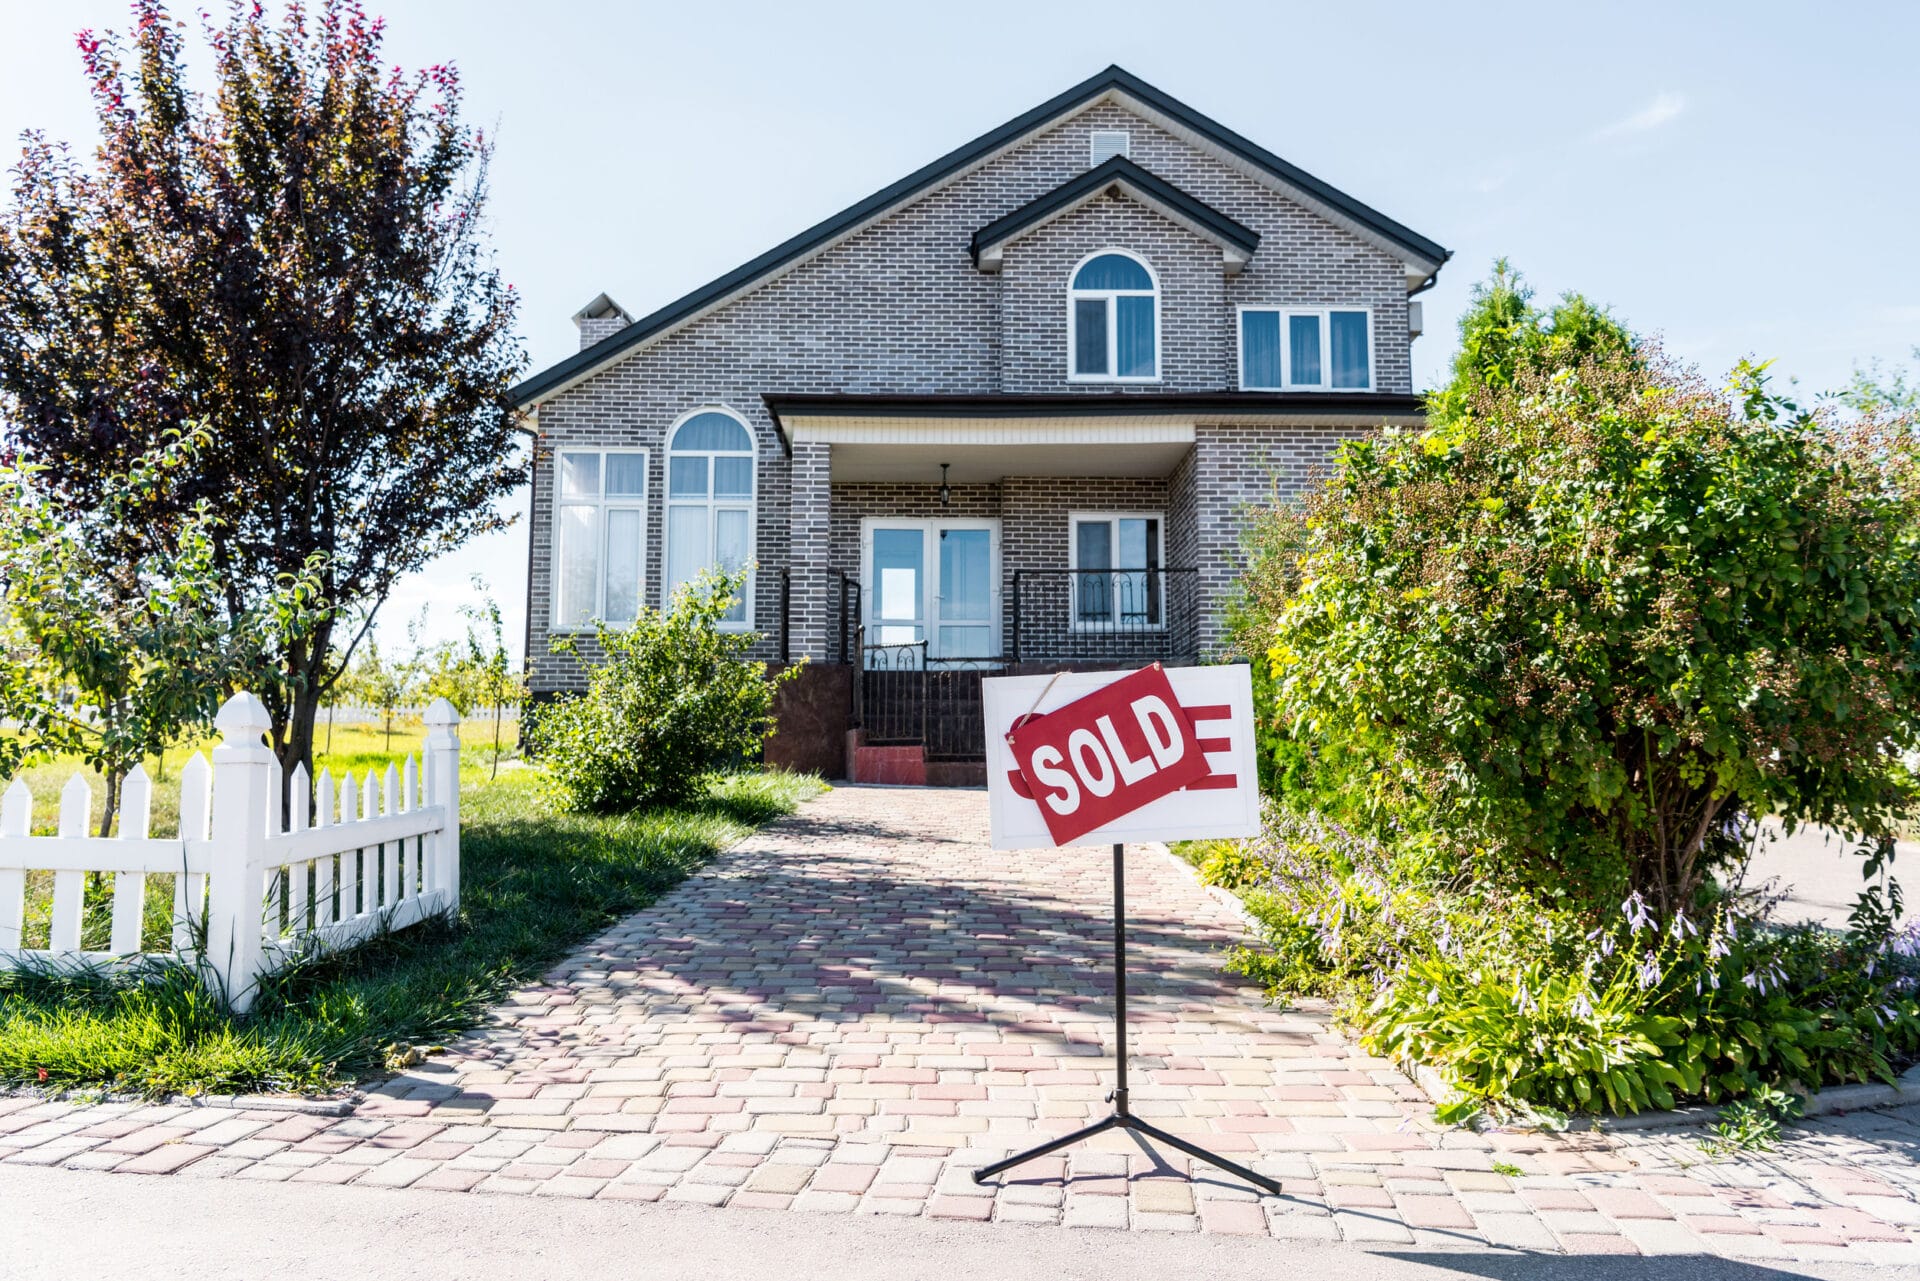 Buying a home during the COVID-19 crisis is common. Brick house has been sold.